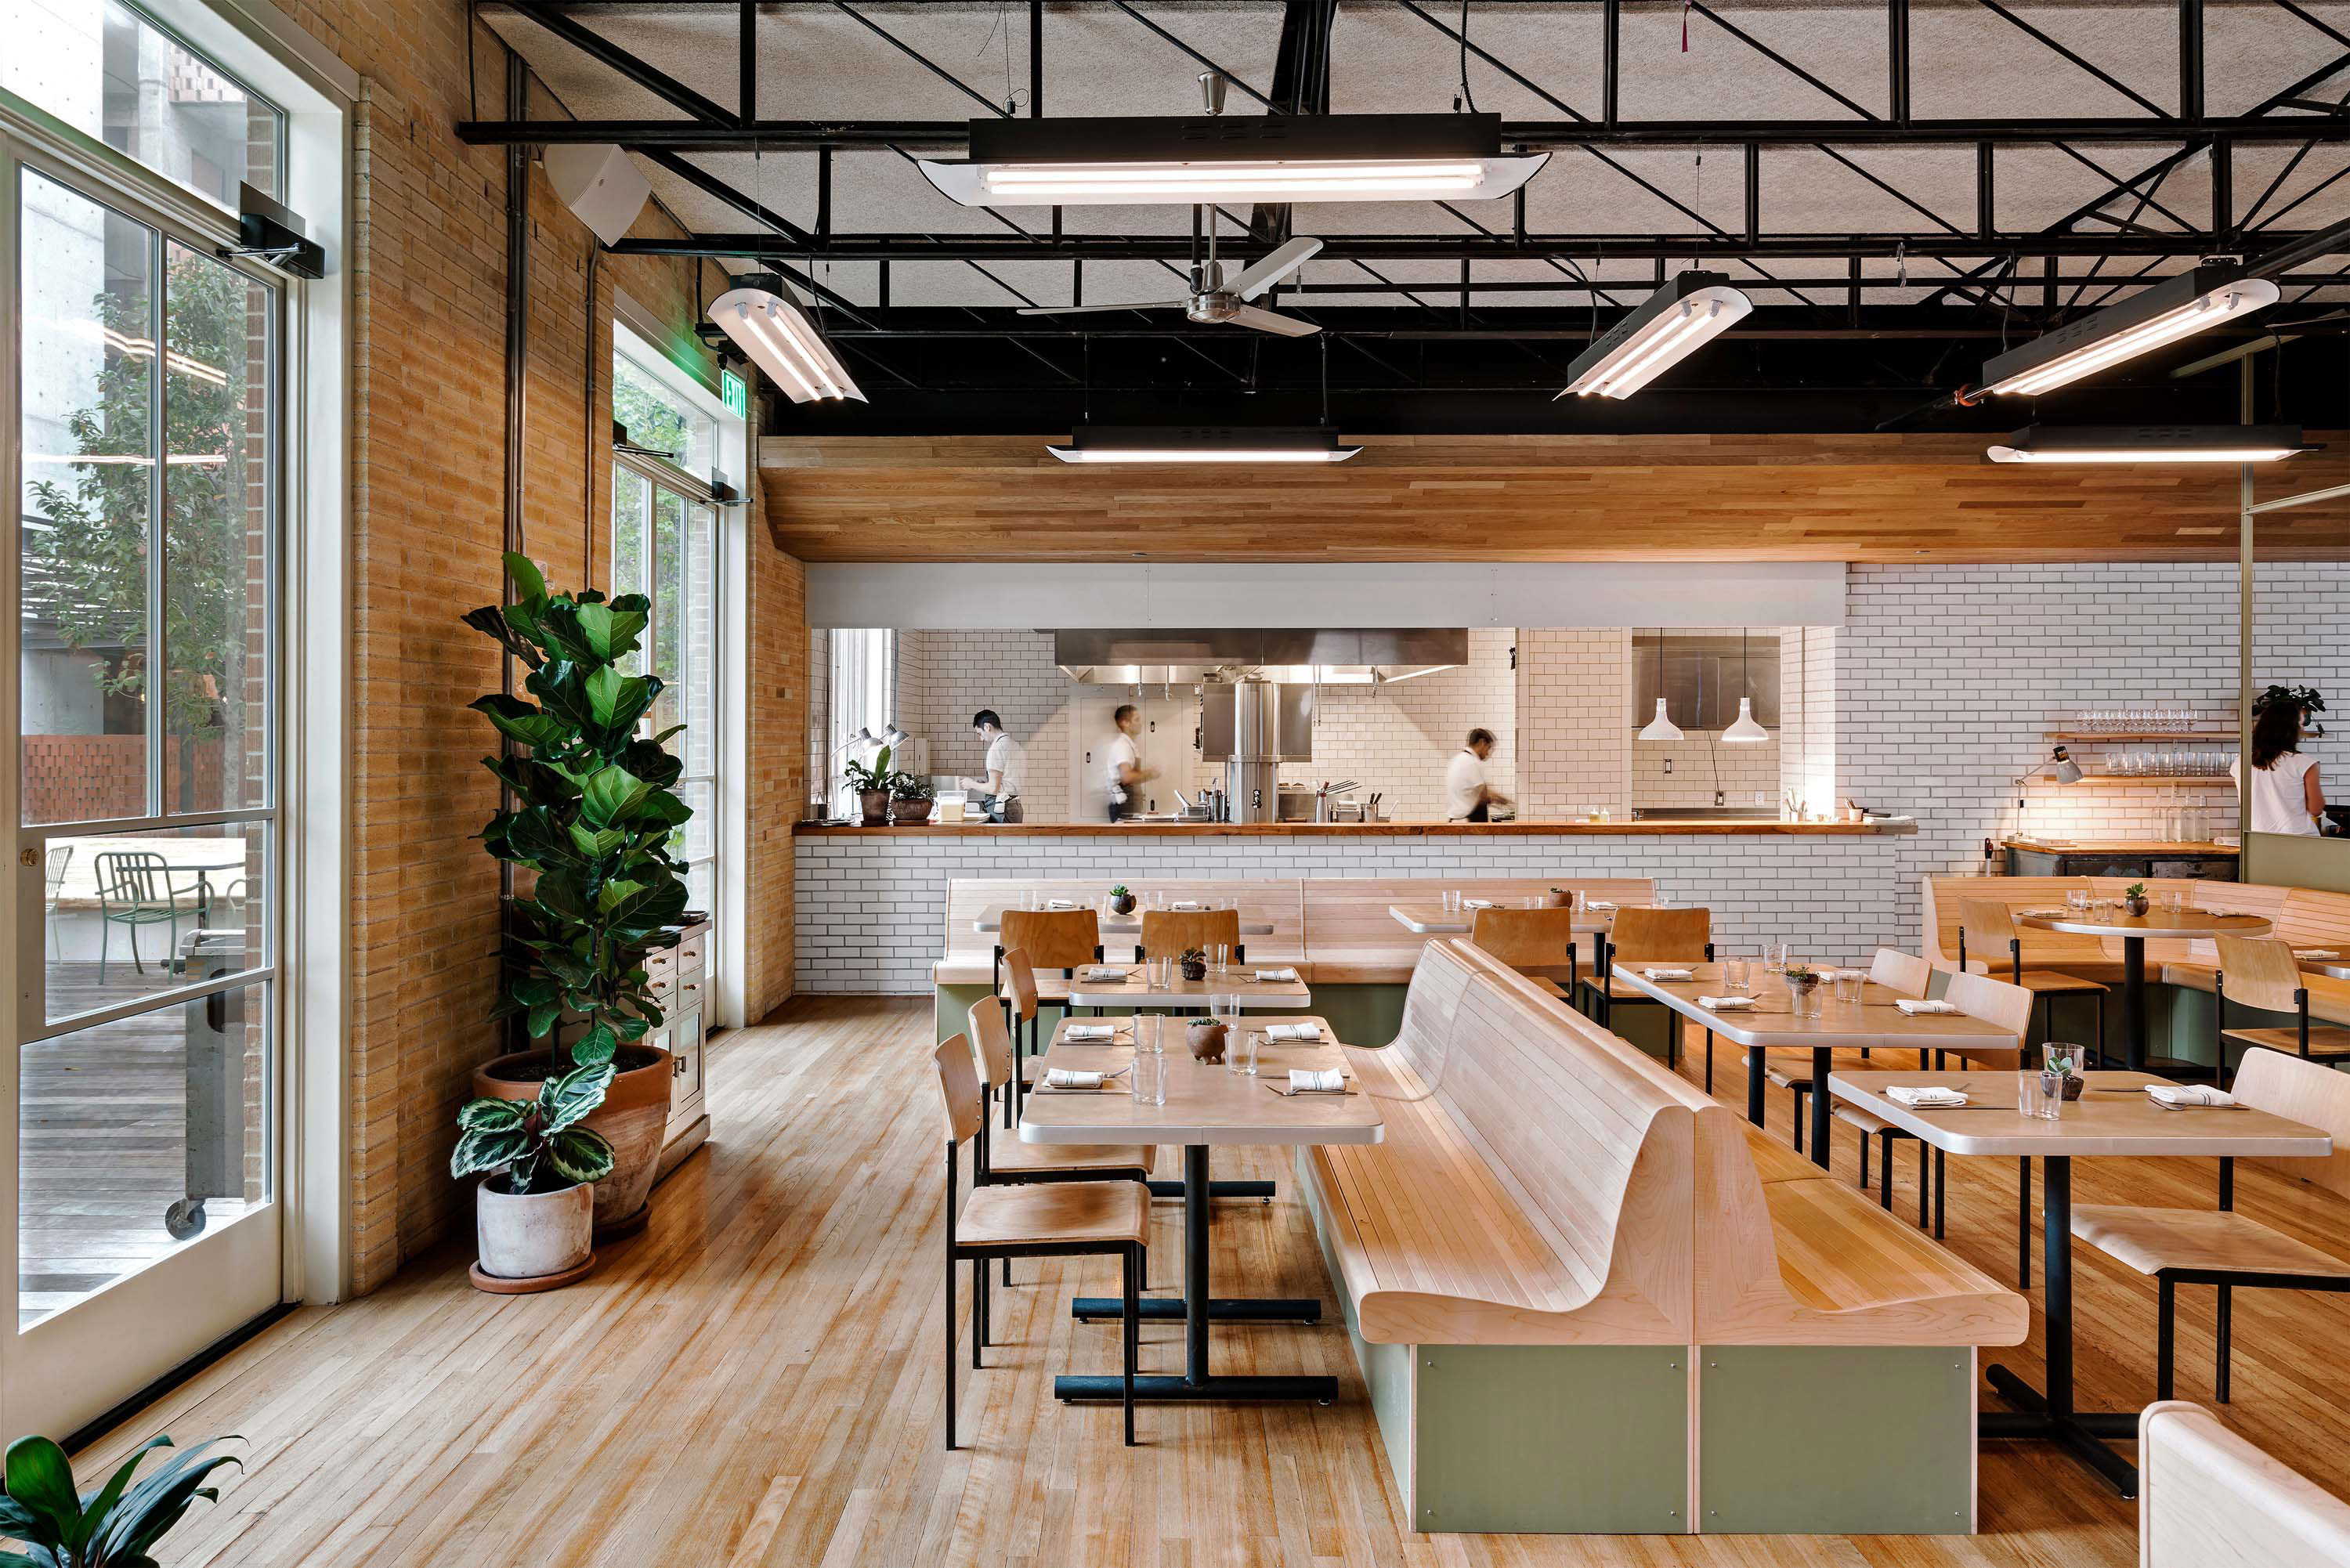 Interior photo of the Carpenter Hotel by Specht Novak Architects. Shot by Chase Daniel, featuring a cozy restaurant with wooden floors, beamed ceilings and large bright windows.